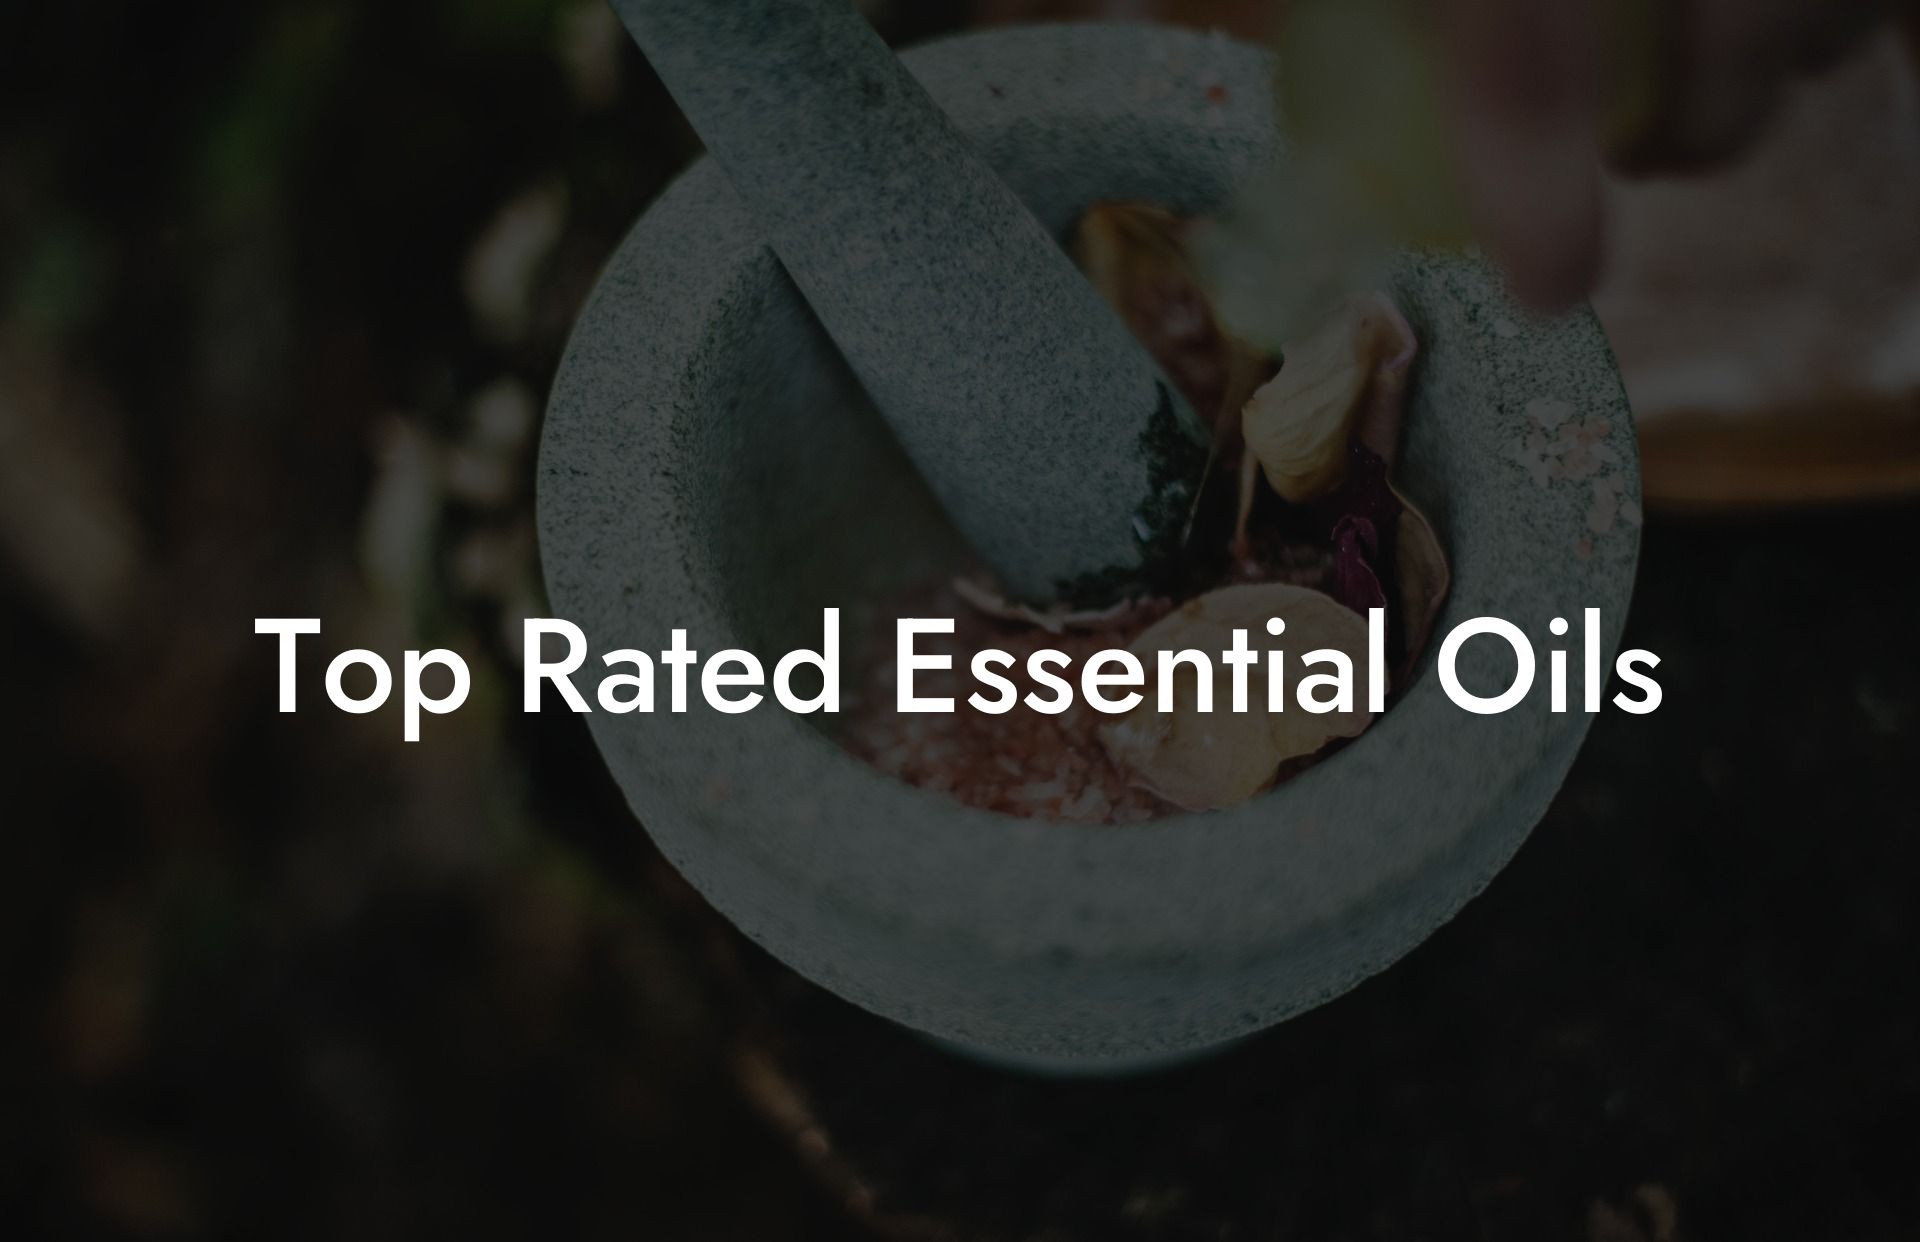 Top Rated Essential Oils